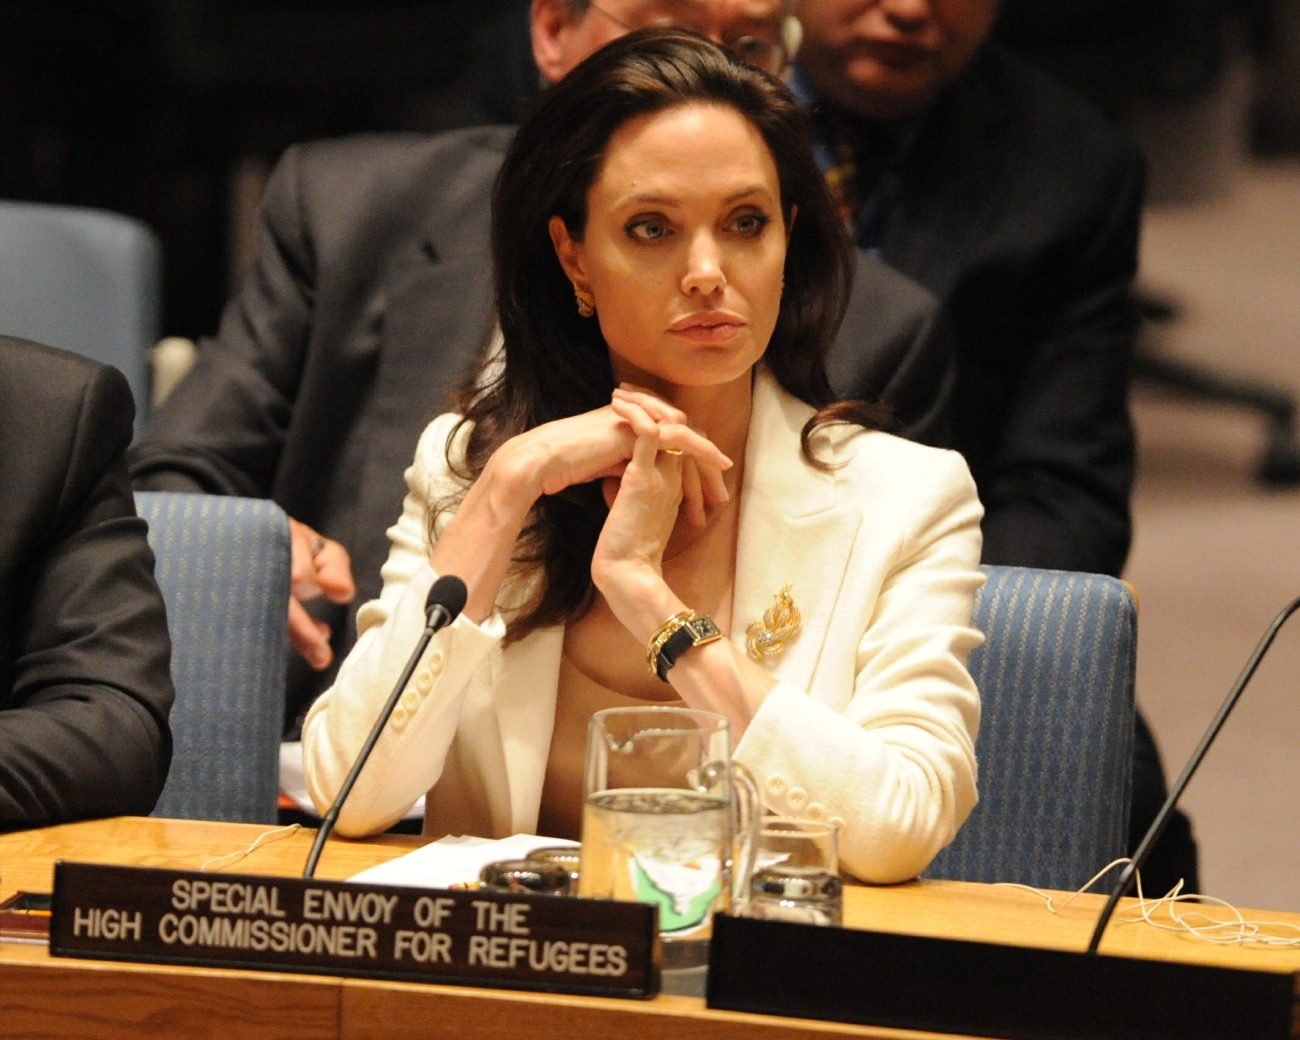 **** NO WEB USE UNTIL APRIL 25th 10 AM EST **** Angelina Jolie makes a powerful speech criticizing the lack of effort over the crisis in Syria during United Nations Security Council meeting in New York City